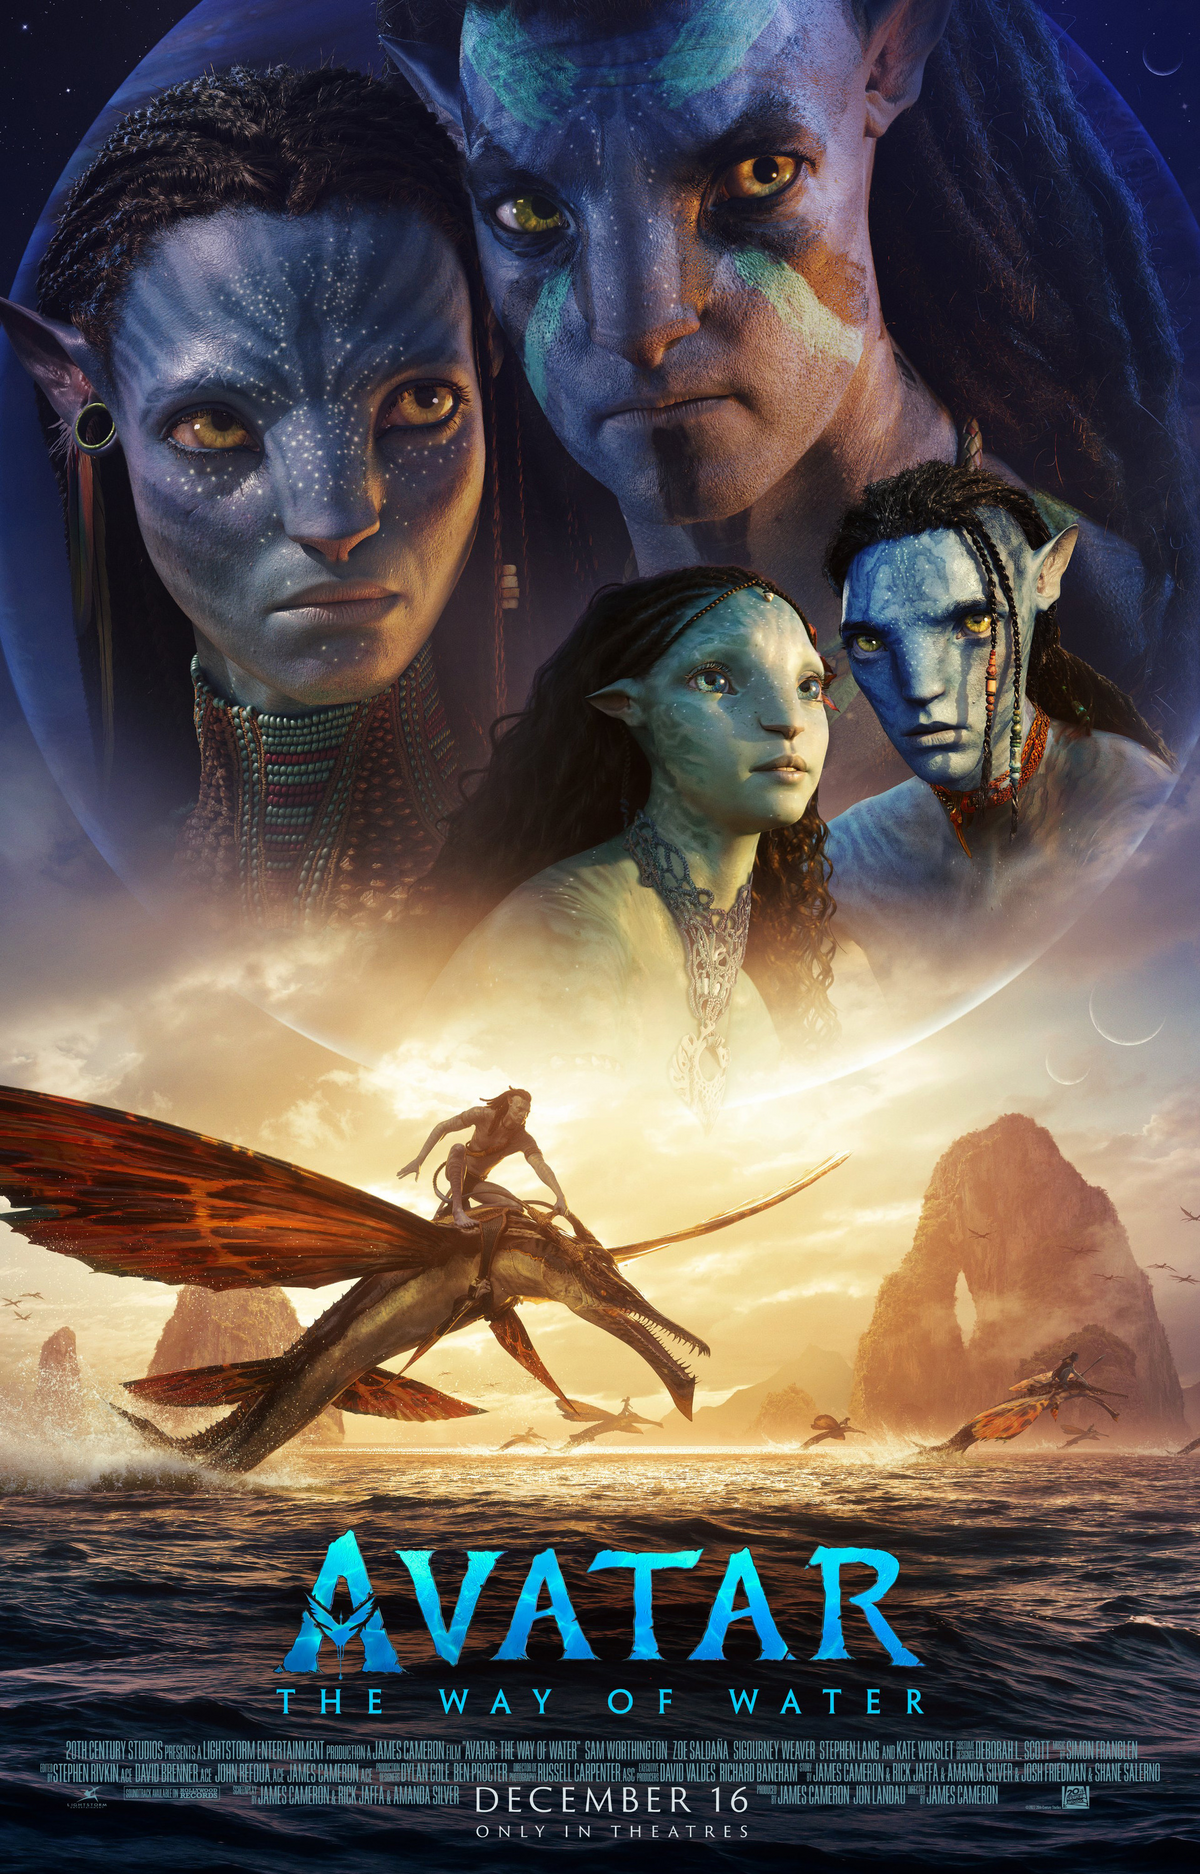 Gallery: Avatar: The Way of Water